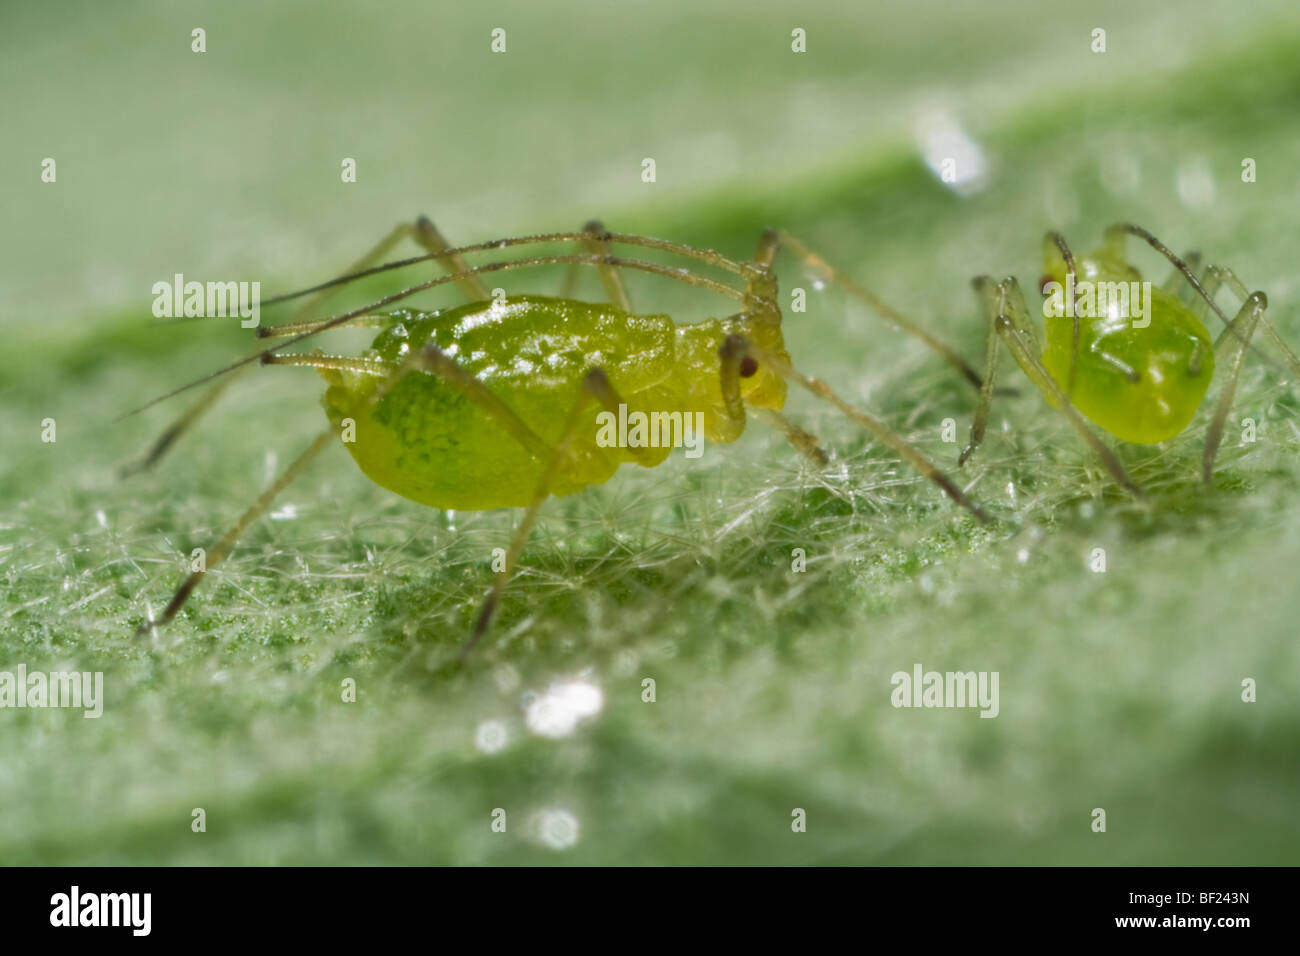 Agriculture - Green peach aphid adults (Myzus persicae) on a leaf, side and posterior views / California, USA. Stock Photo